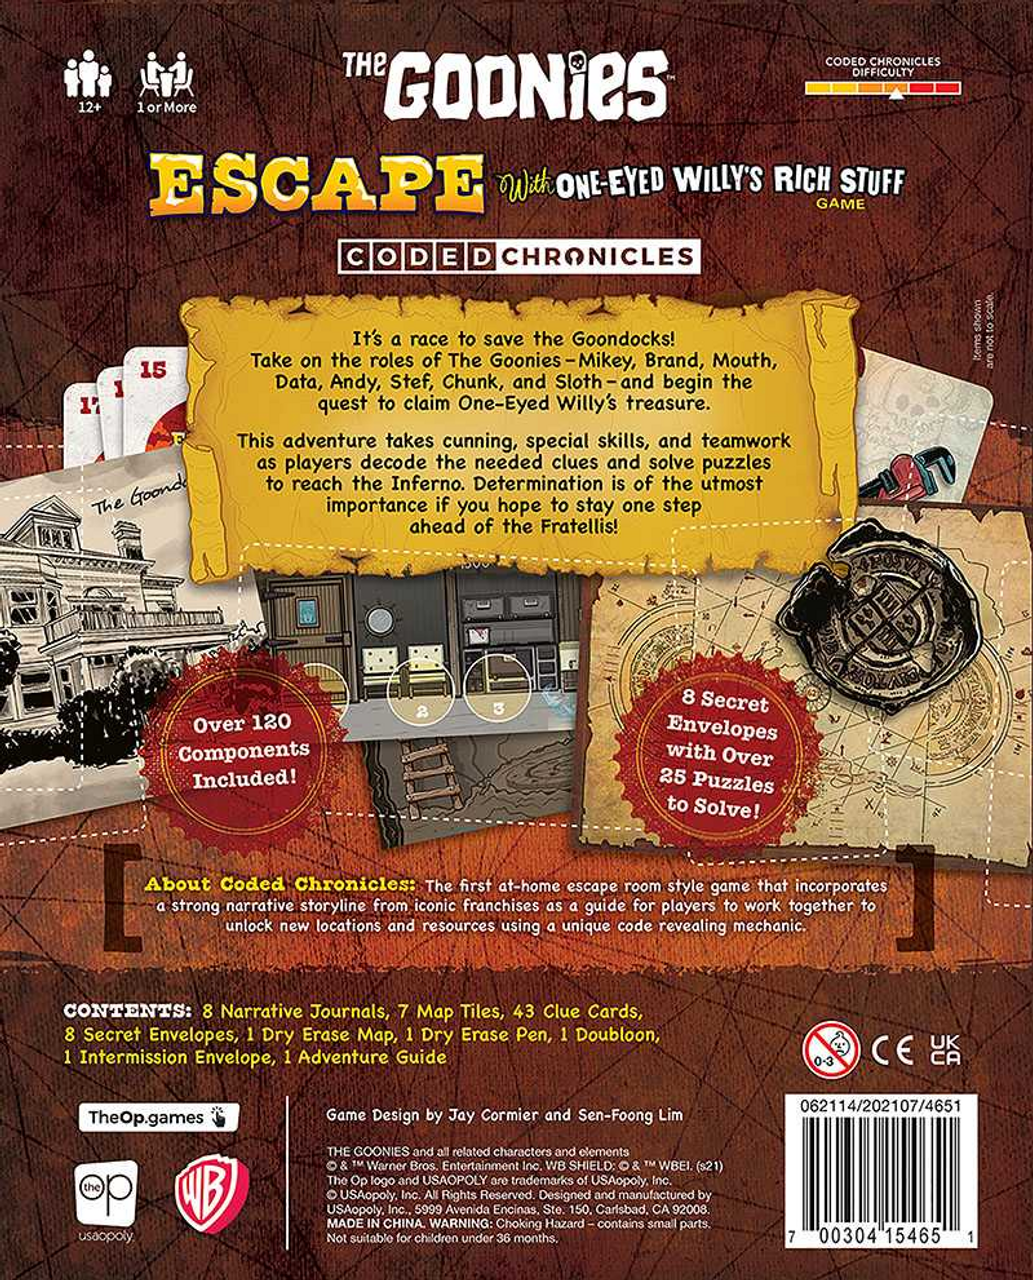 The Goonies: Escape with One-Eyed Willy’s Rich Stuff – A Coded Chronicles Game